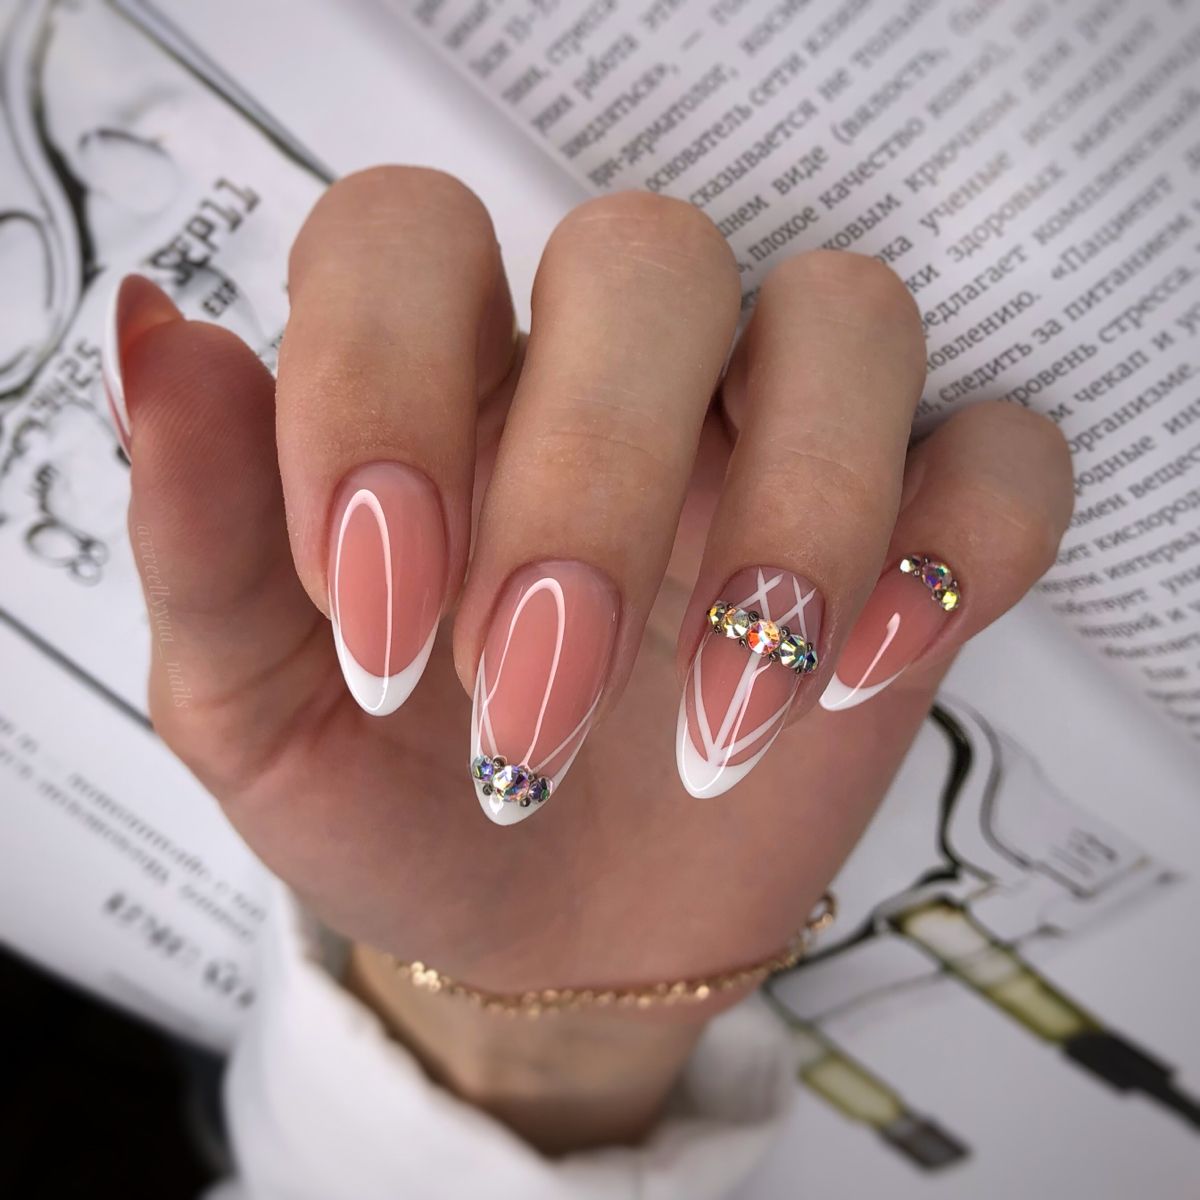 Fall Nail 15 Ideas: Sparkling Rhinestone Designs to Elevate Your Style